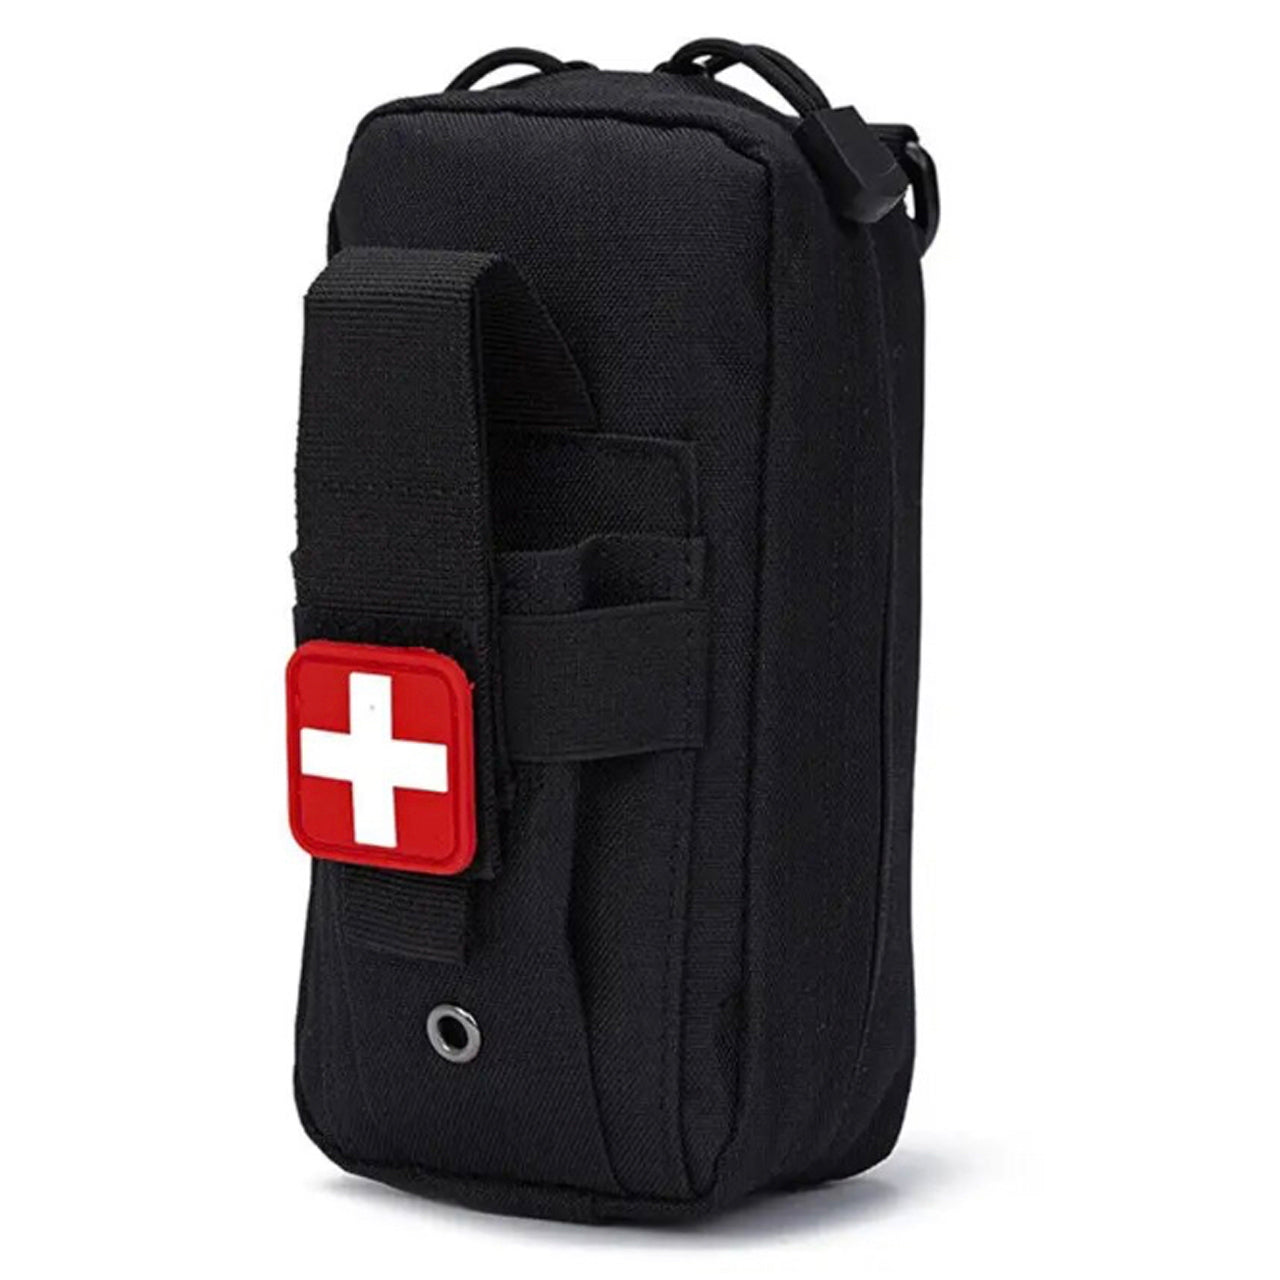 Compact Emergency kit pouch with lots of uses, carry your tourniquet, multitool or torch in the front pocket. Add your essential items in the main compartment from bandages to rations. Attach to your gear with x2 MOLLE straps to suit your needs but don't forget this essential pouch in the field. www.moralepatches.com.au